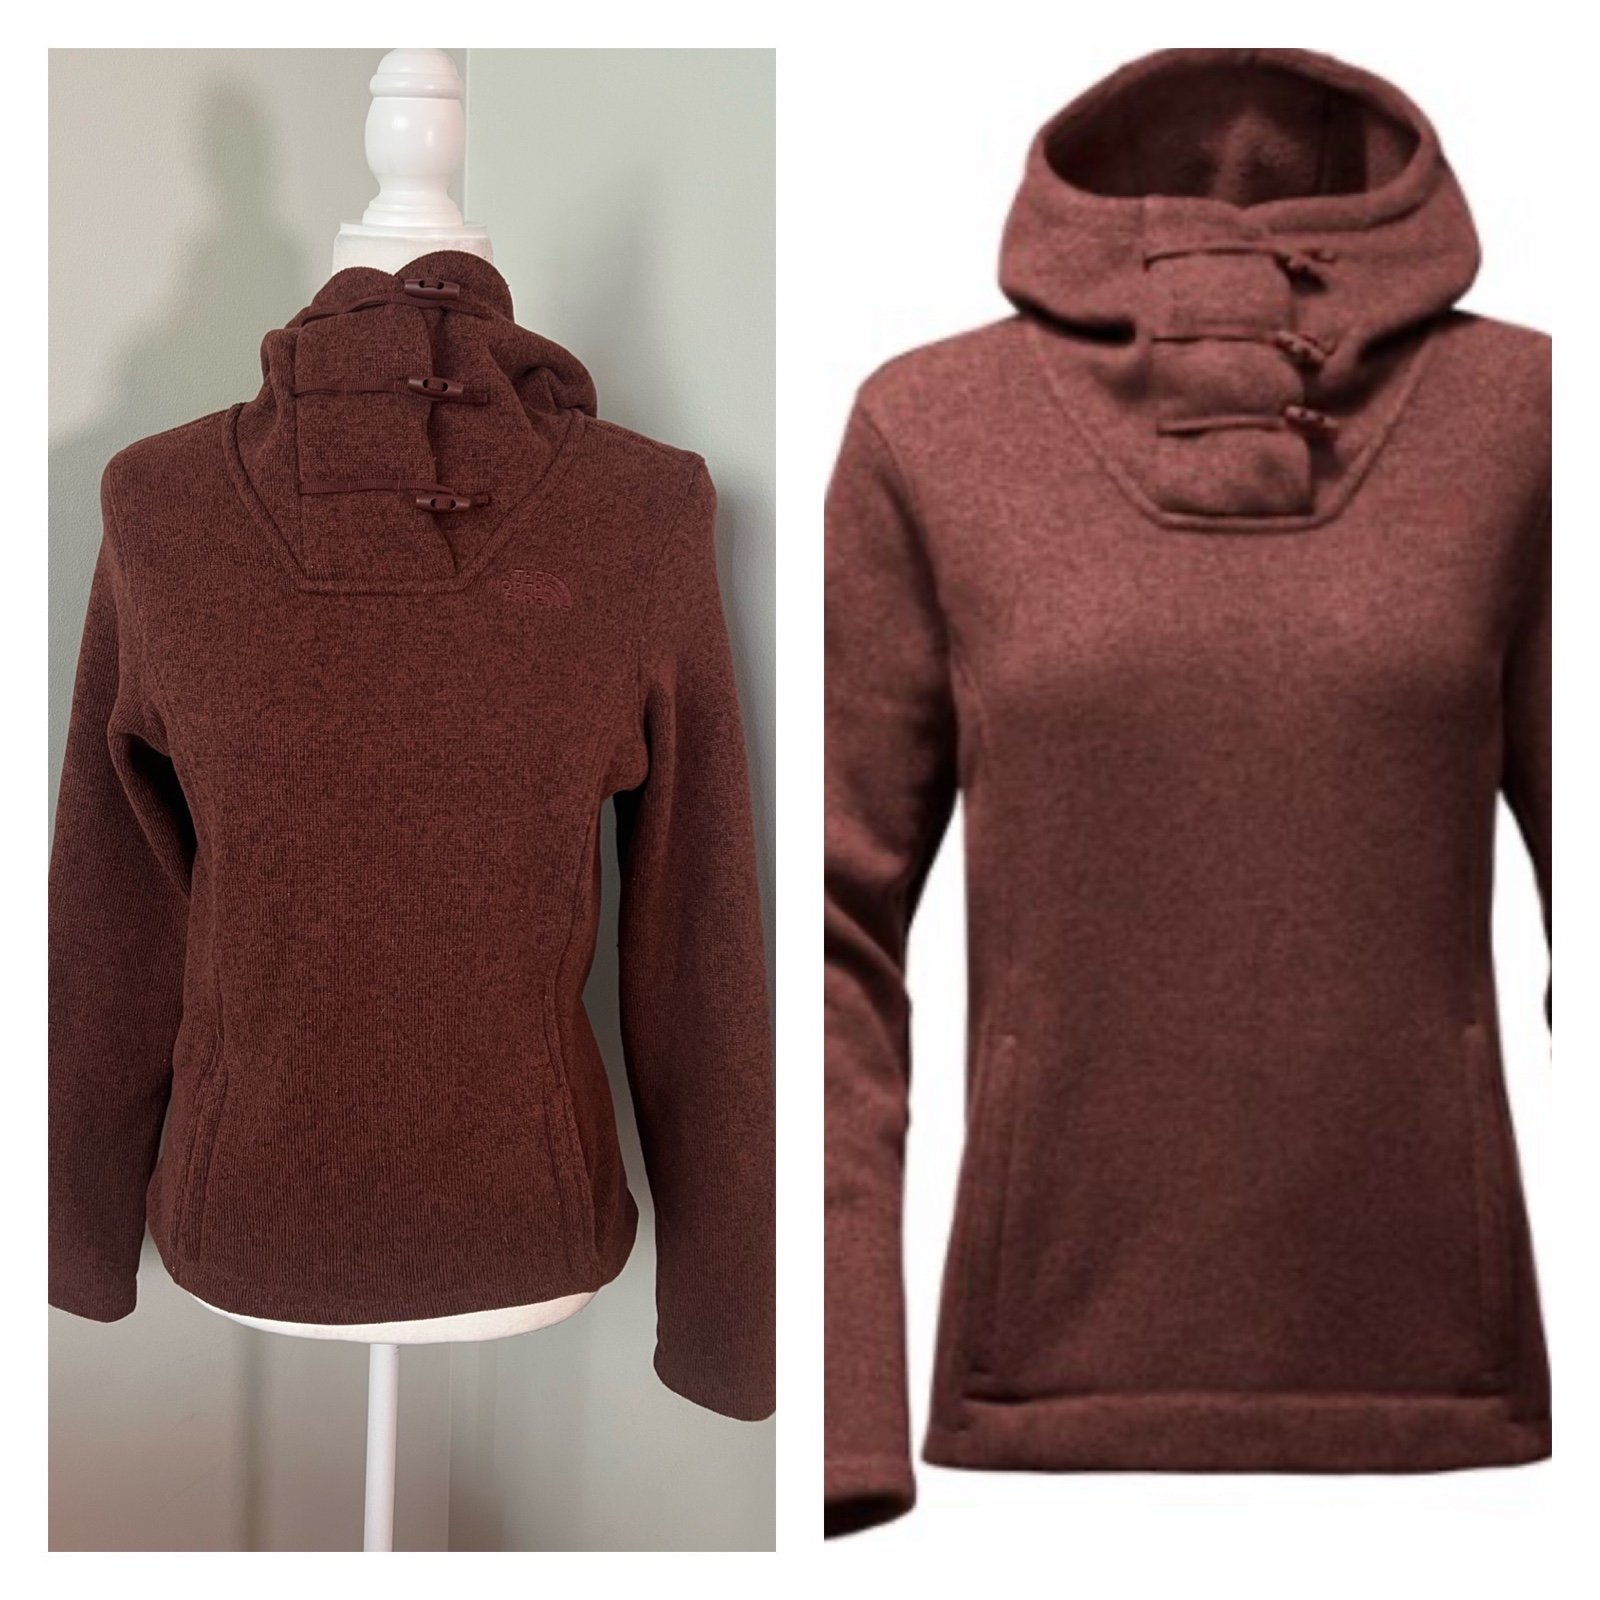 High quality NORTH FACE Crescent Hoodie Burgundy Wine Maroon  Toggle Neck SZ XS hF5uDobbh High Quaity